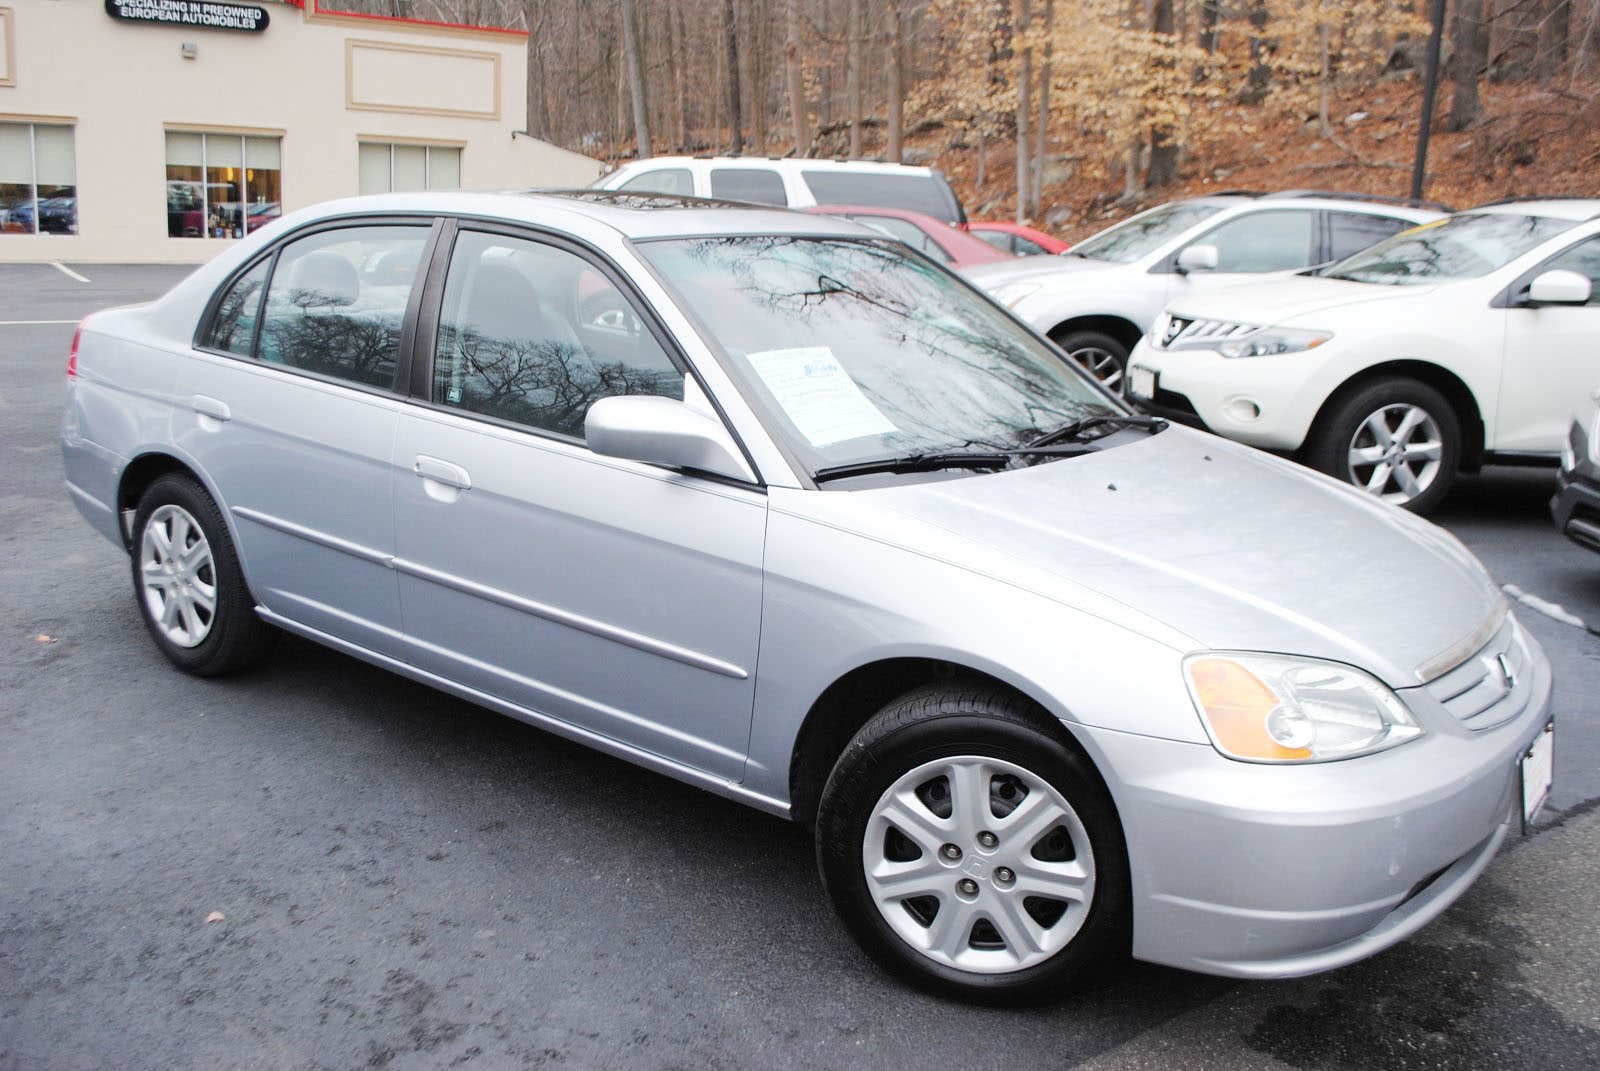 Used 2003 Honda Civic For Sale | West Milford NJ